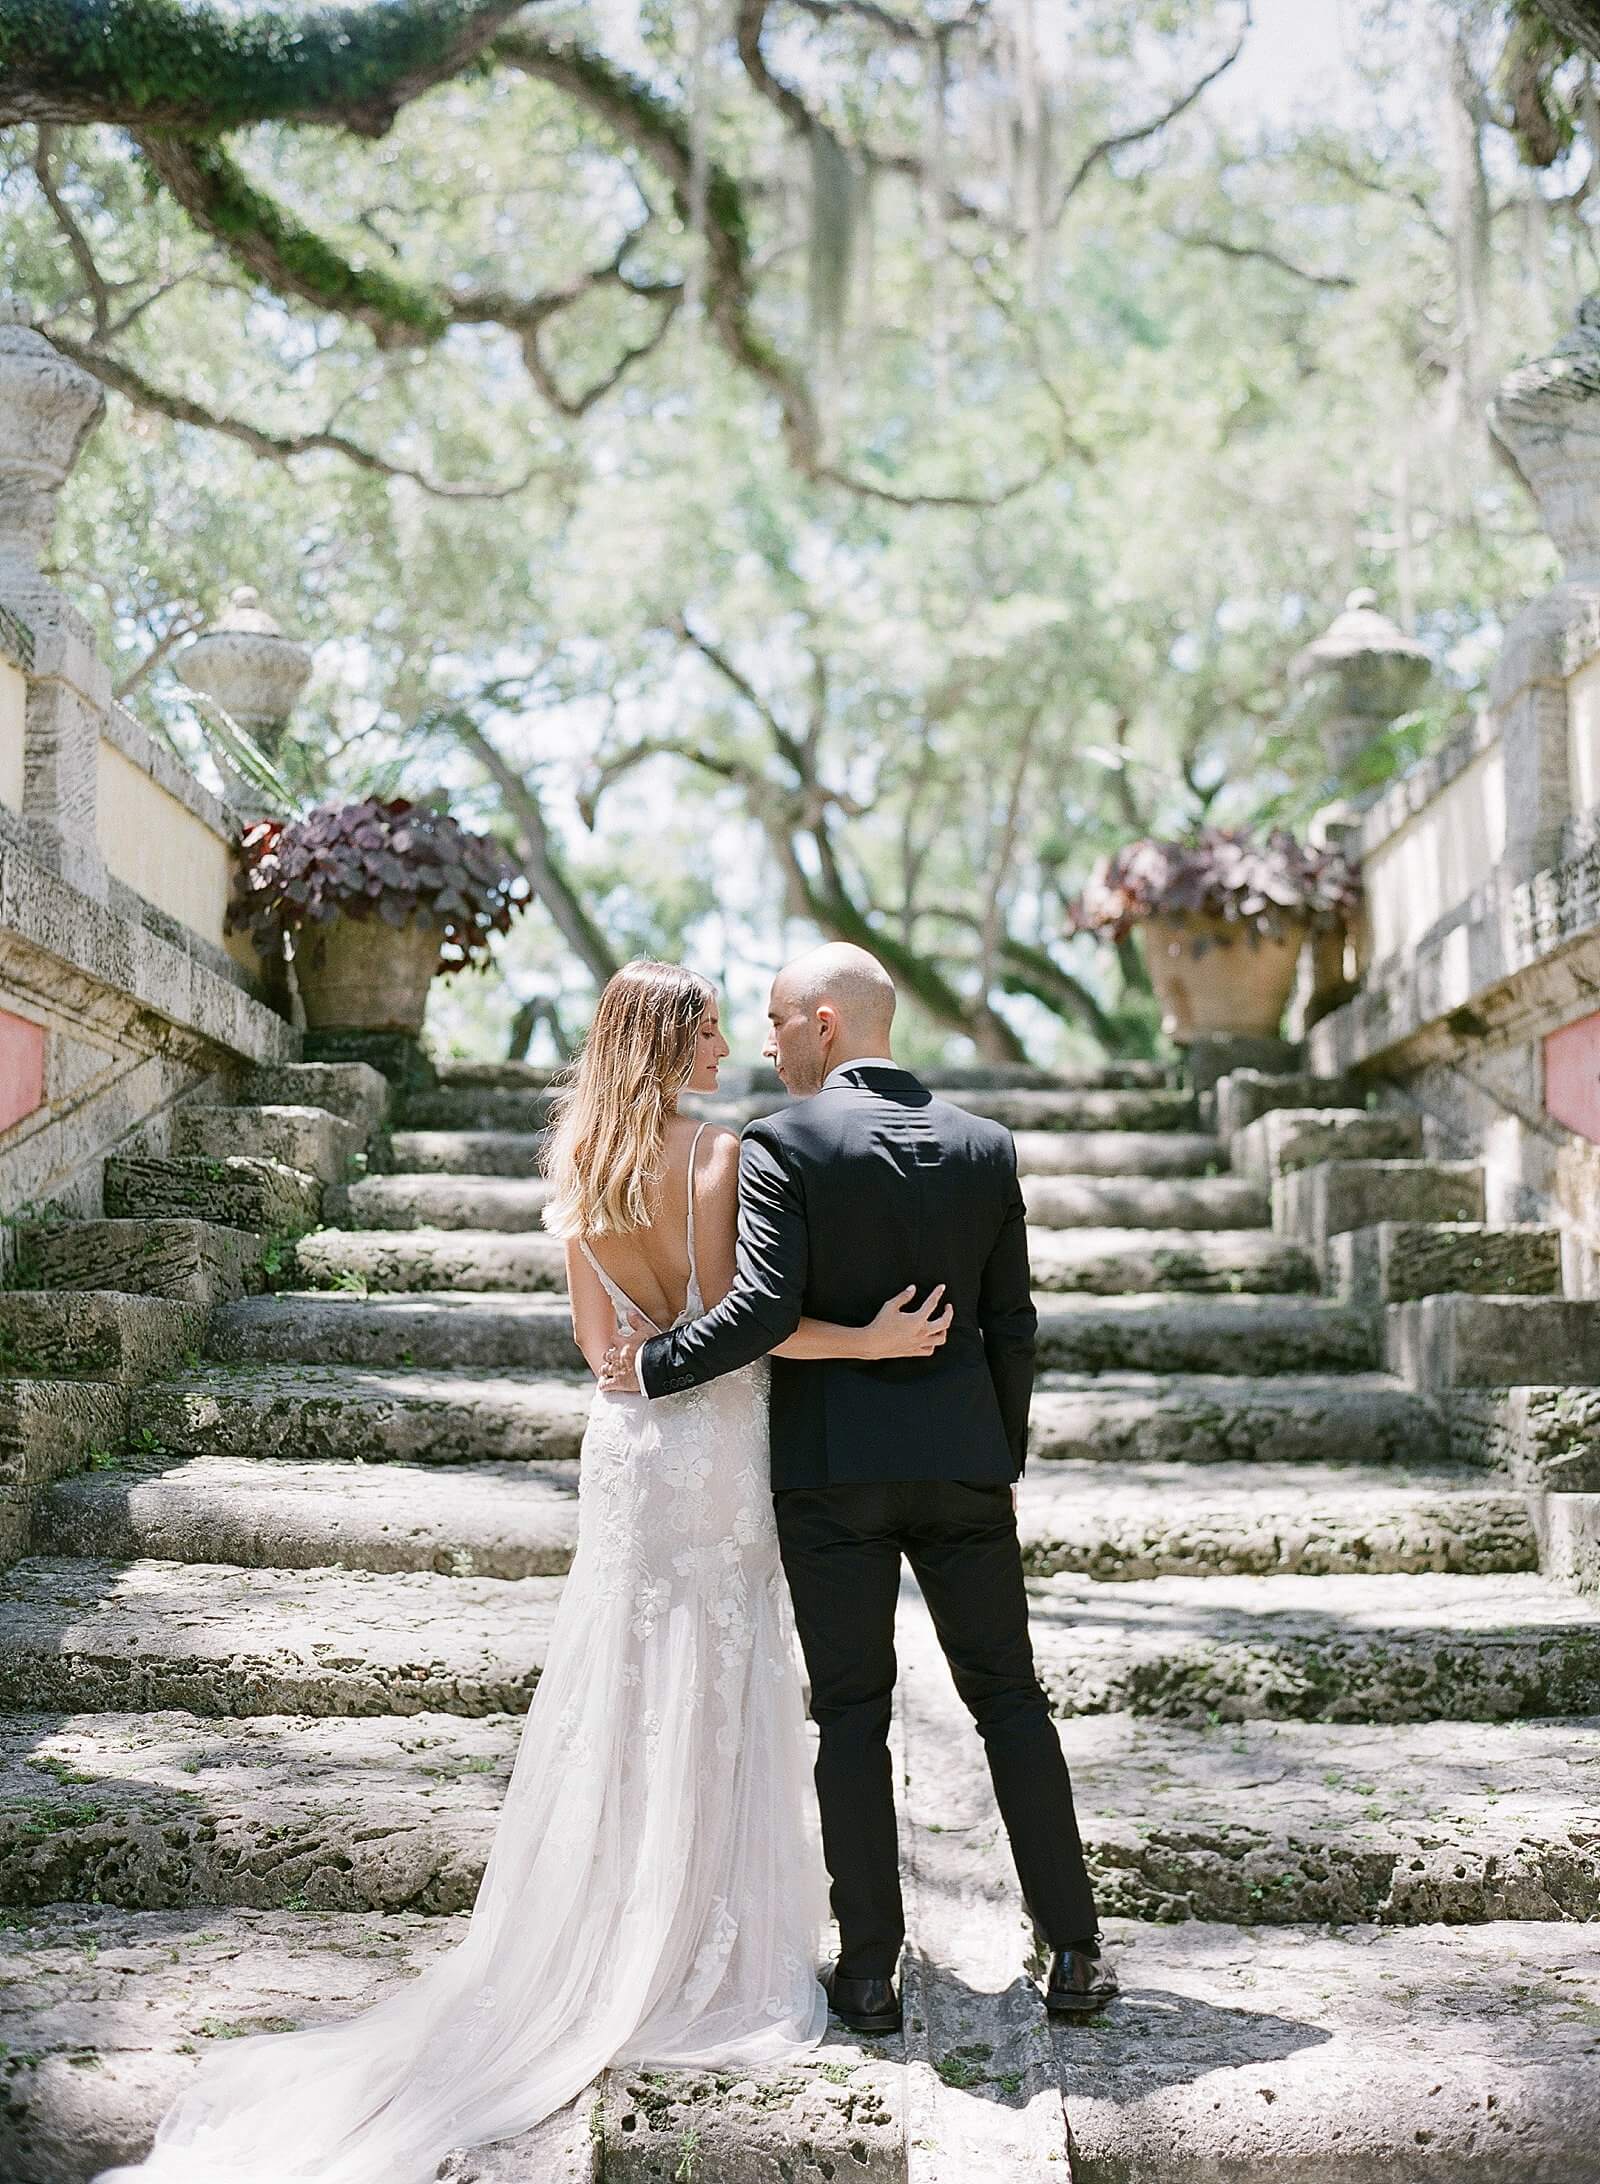 Portrait of bride and groom during at a wedding at The Vizcaya Museum and Gardens